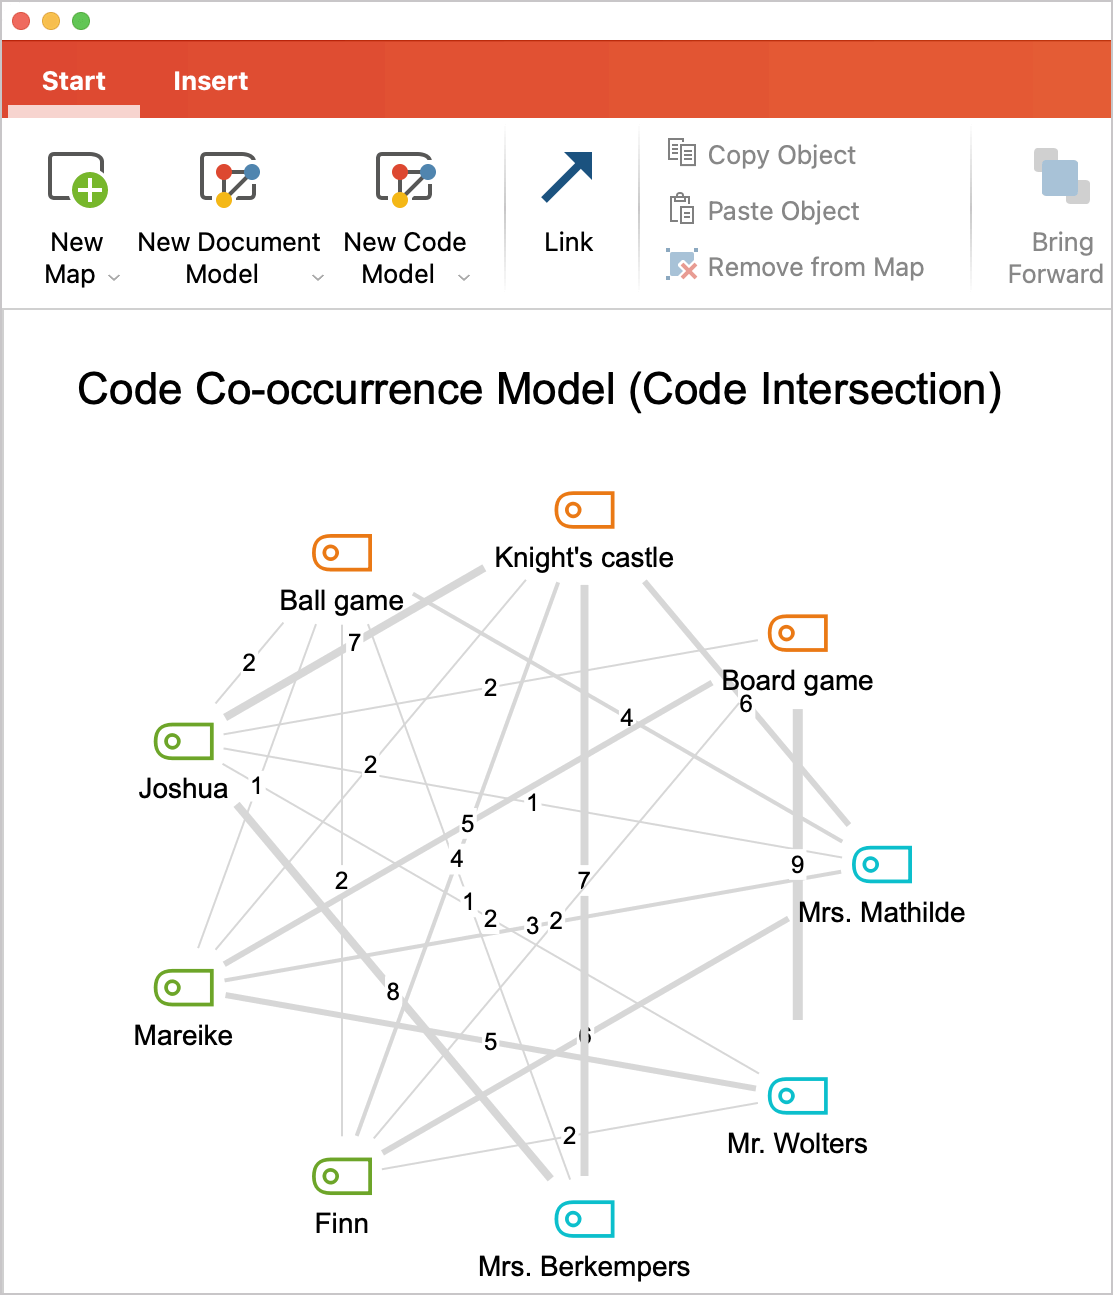 Code Configurations visualized as a Code Relations Model in MAXMaps